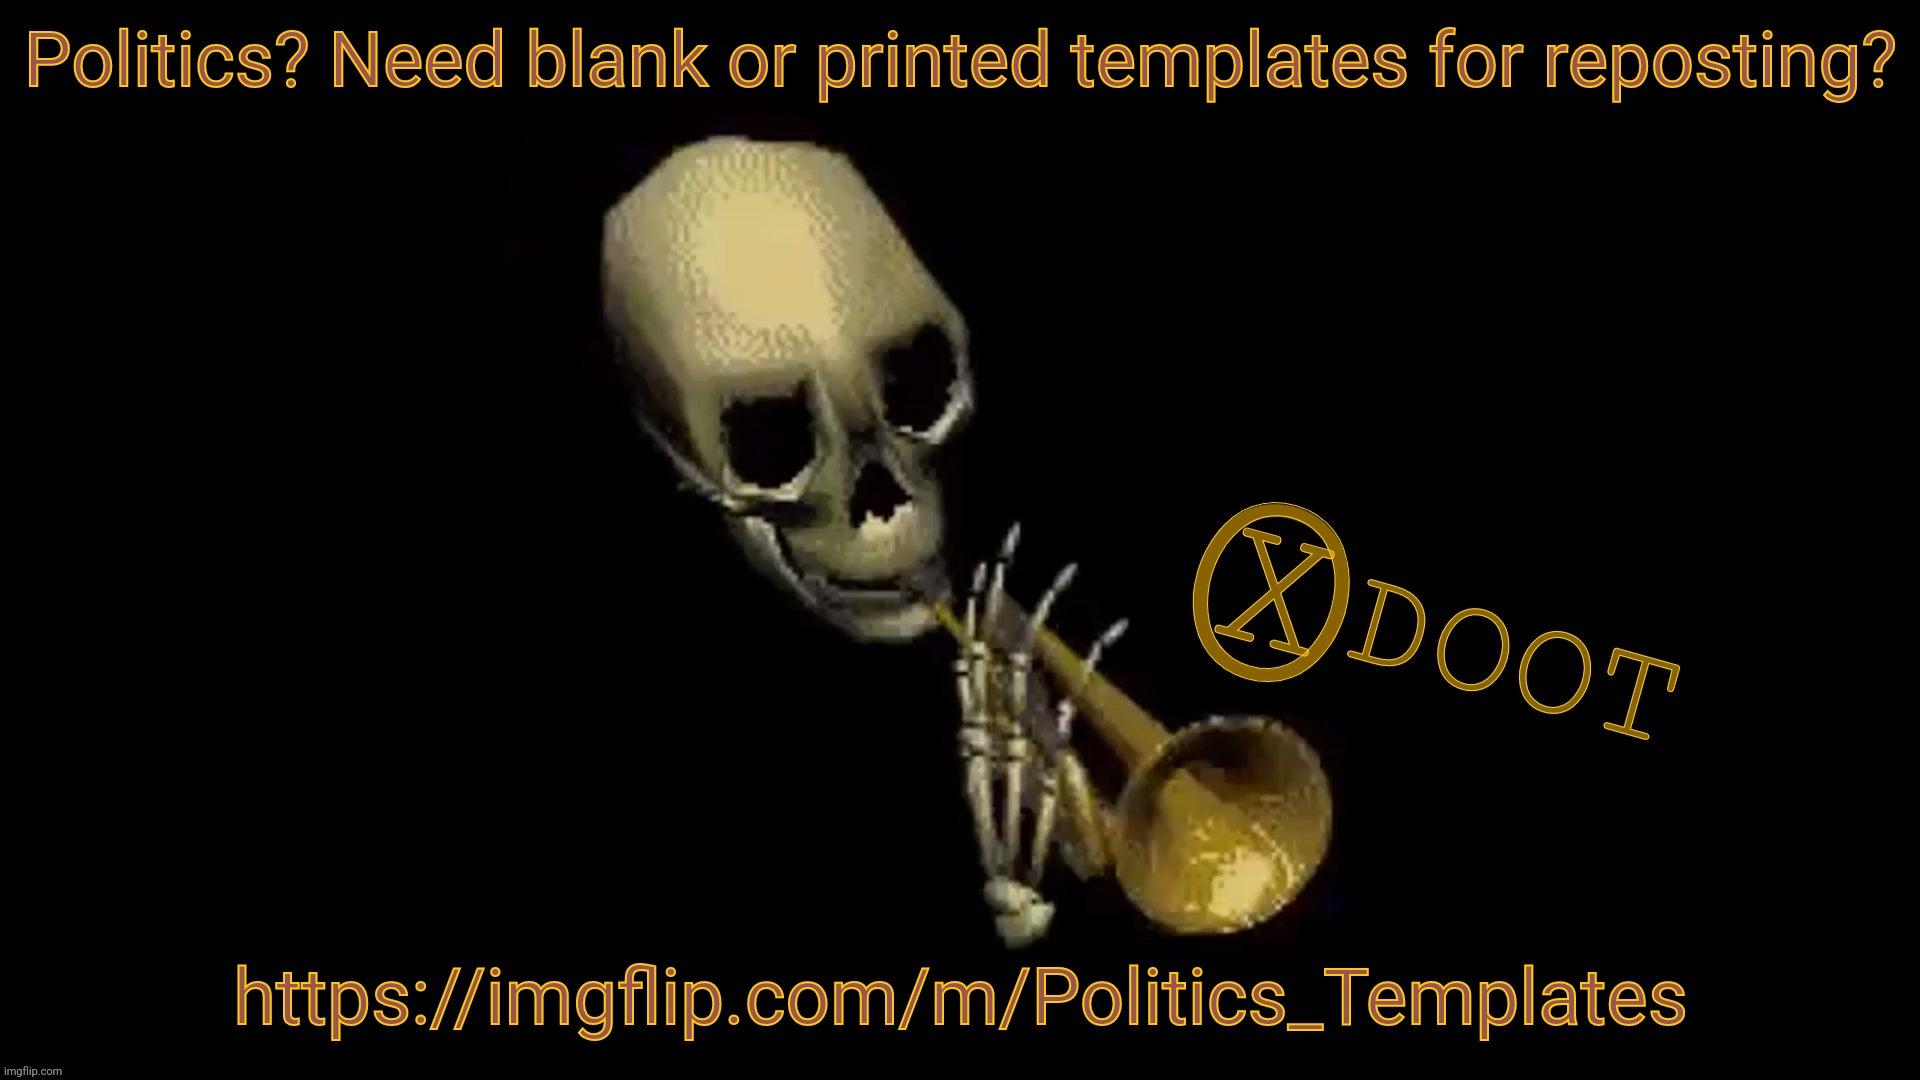 Political templates and memes for borrowing and reposting | Politics? Need blank or printed templates for reposting? https://imgflip.com/m/Politics_Templates | image tagged in x doot,politics templates,politics,political meme,template,meme | made w/ Imgflip meme maker